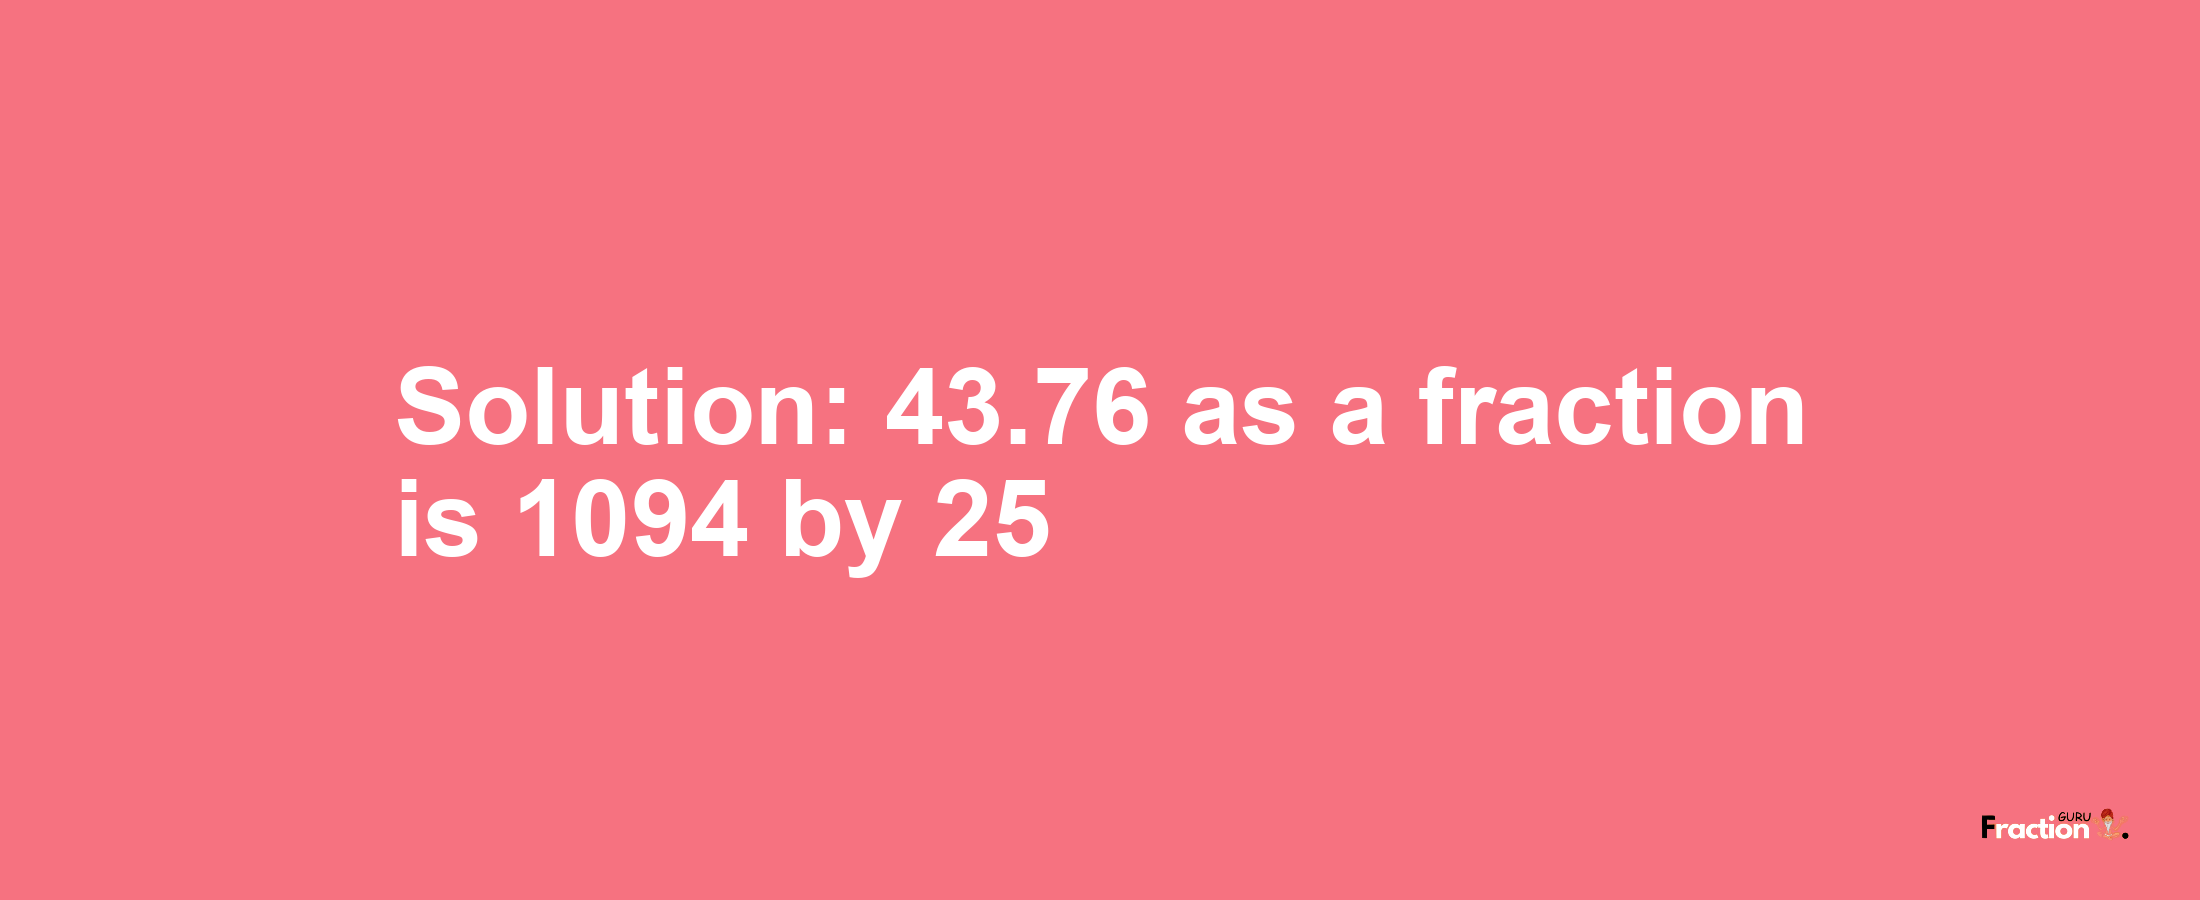 Solution:43.76 as a fraction is 1094/25